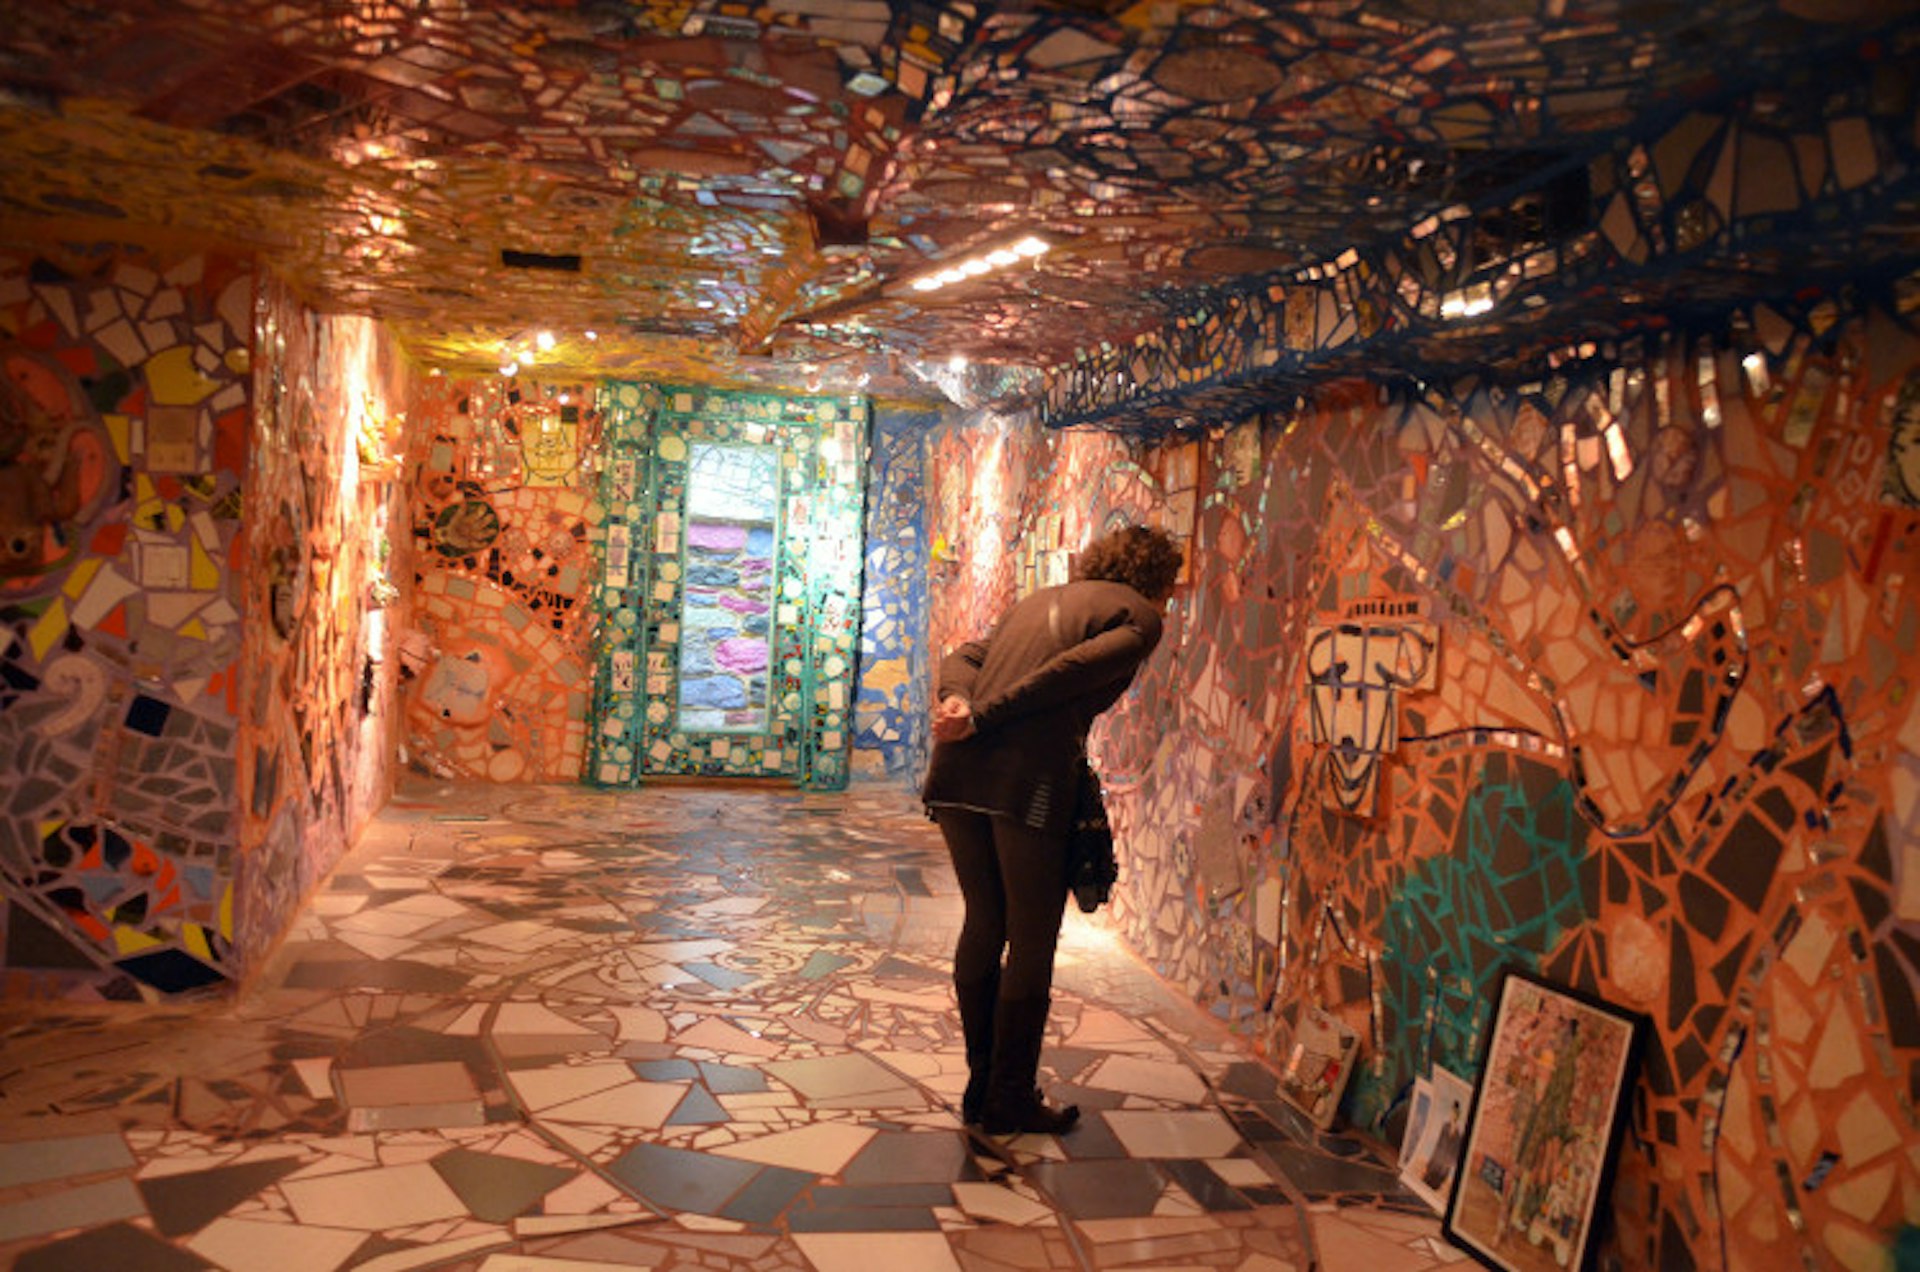 Inside a room of the Magic Gardens. Image by angela n. / CC BY 2.0